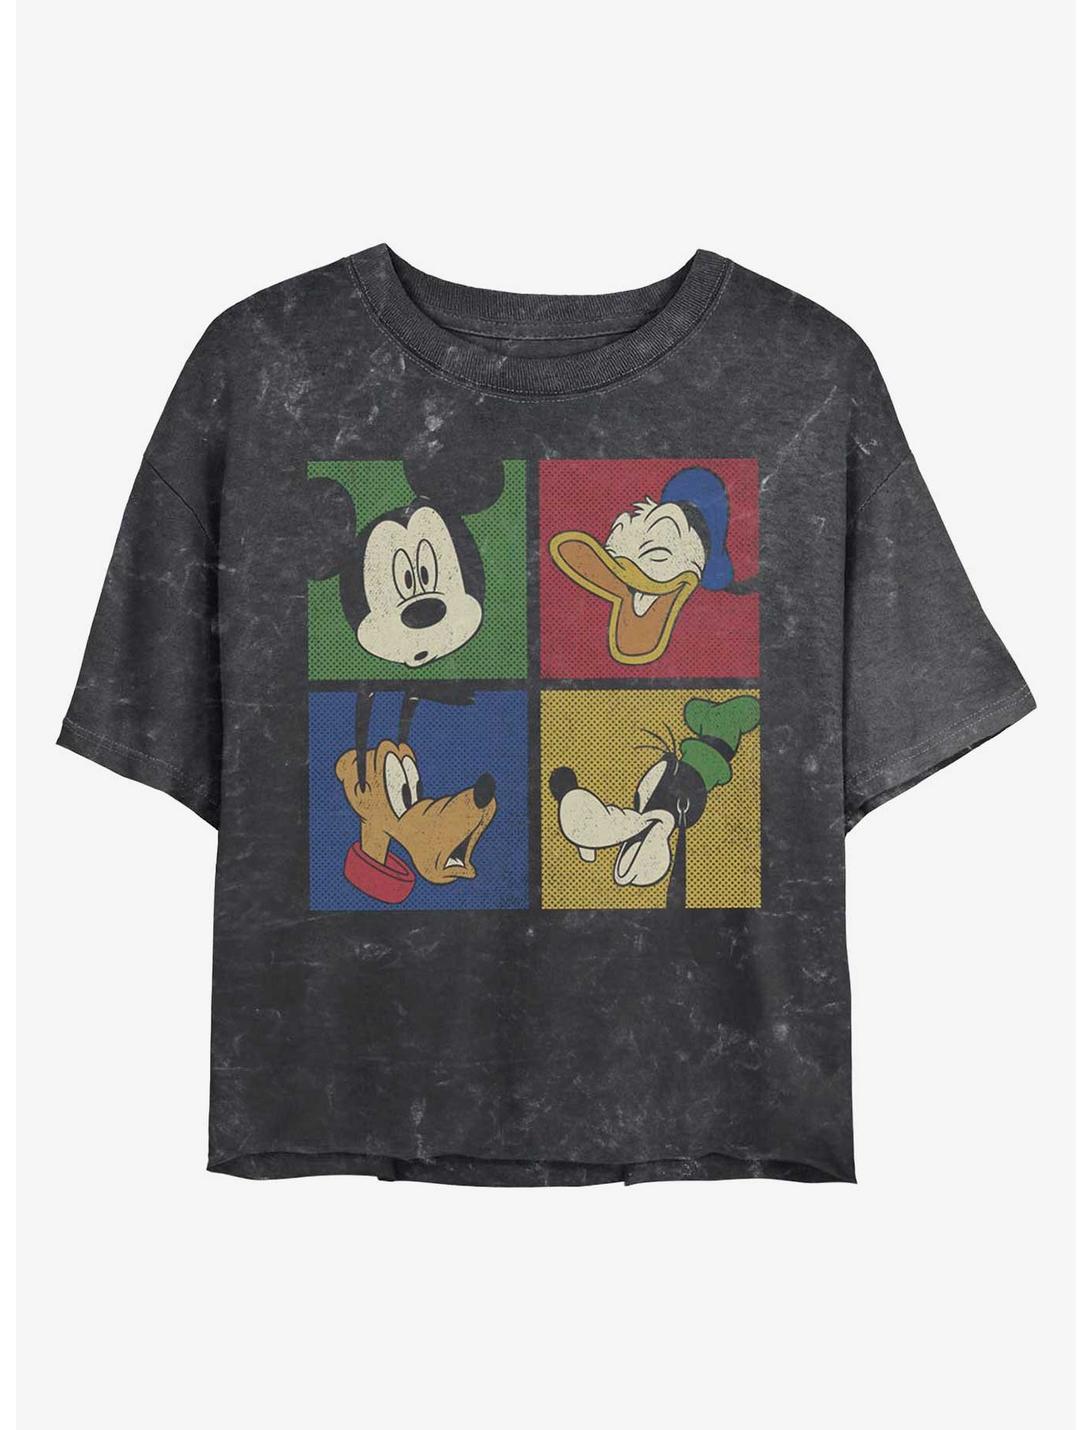 Disney Mickey Mouse Block Party Mineral Wash Crop Girls T-Shirt, BLACK, hi-res